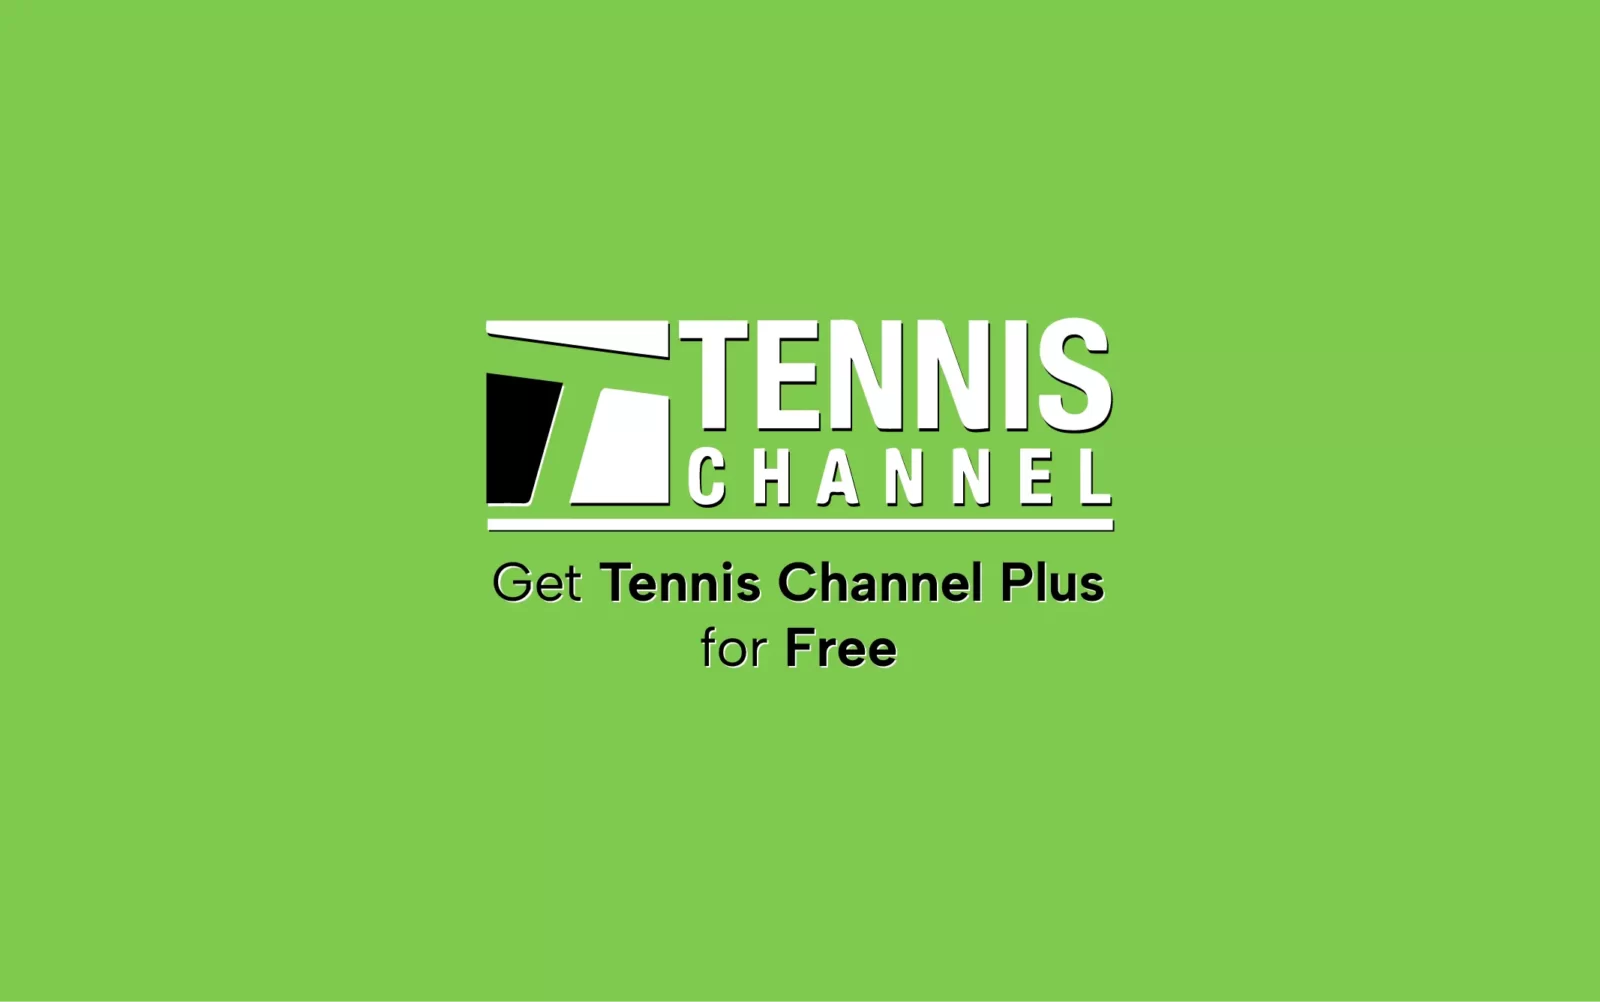 tennis channel plus cost 2021